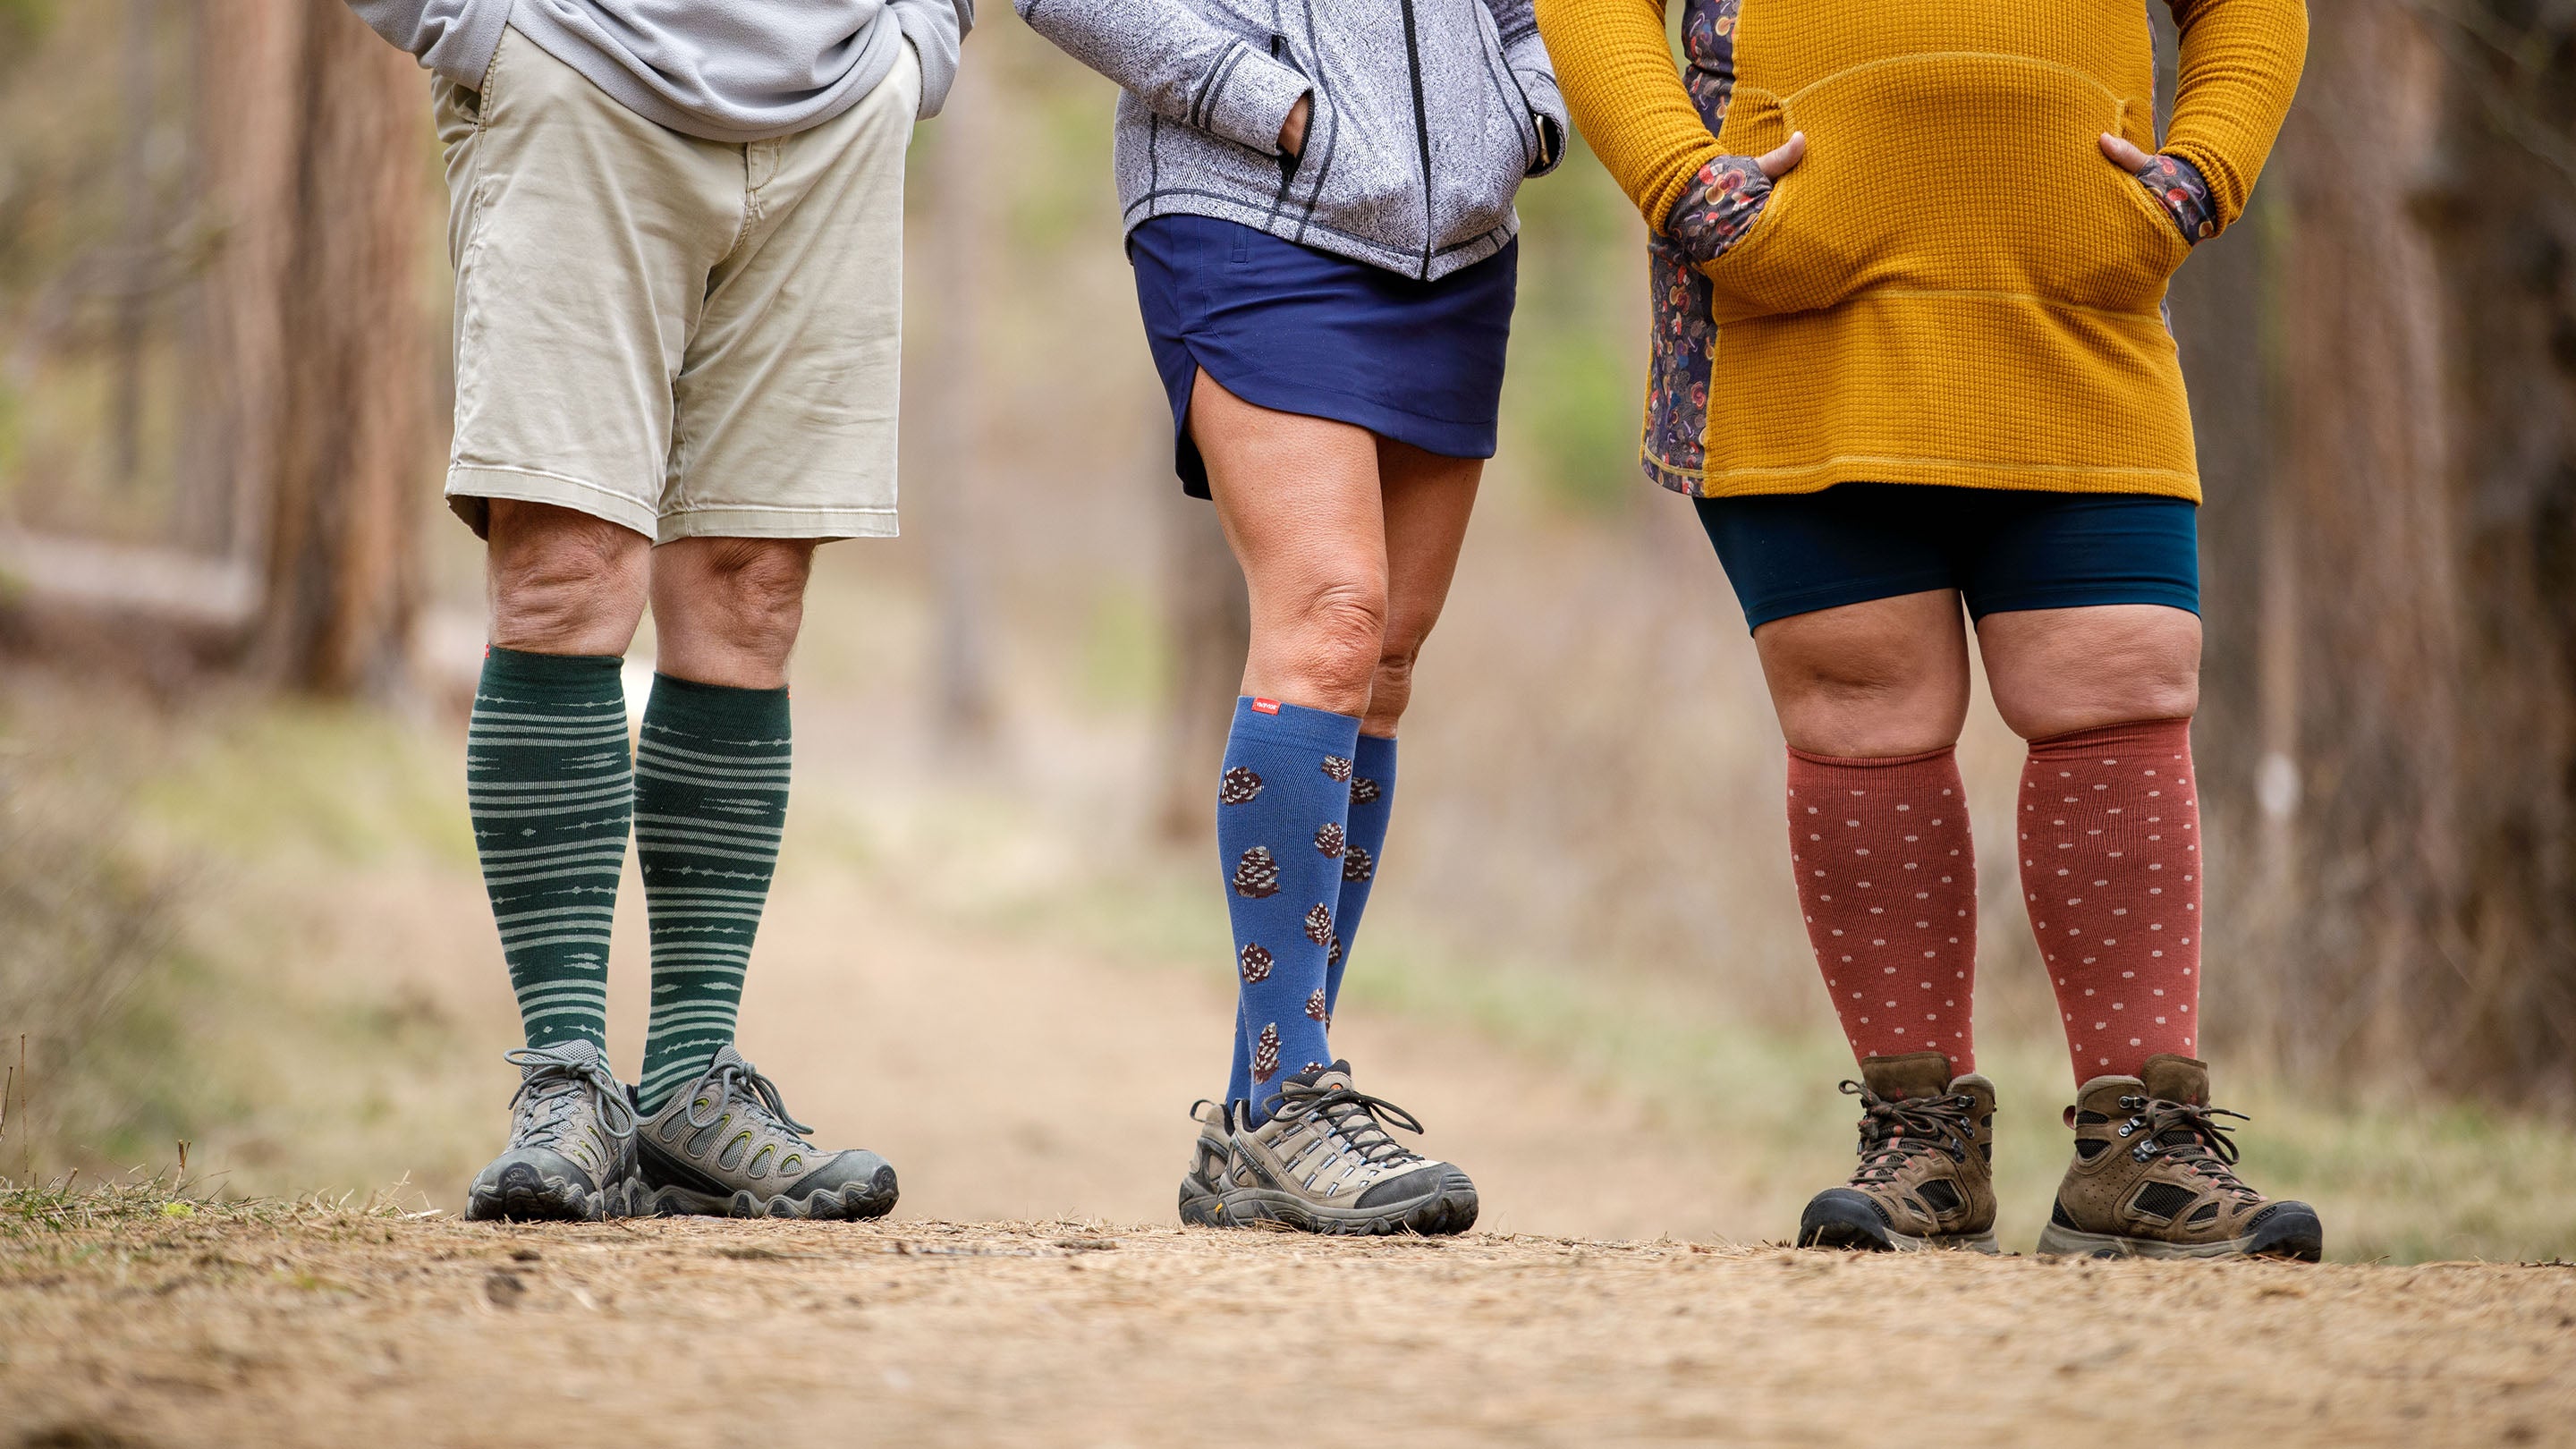 When to Wear Compression Socks and For How Long –